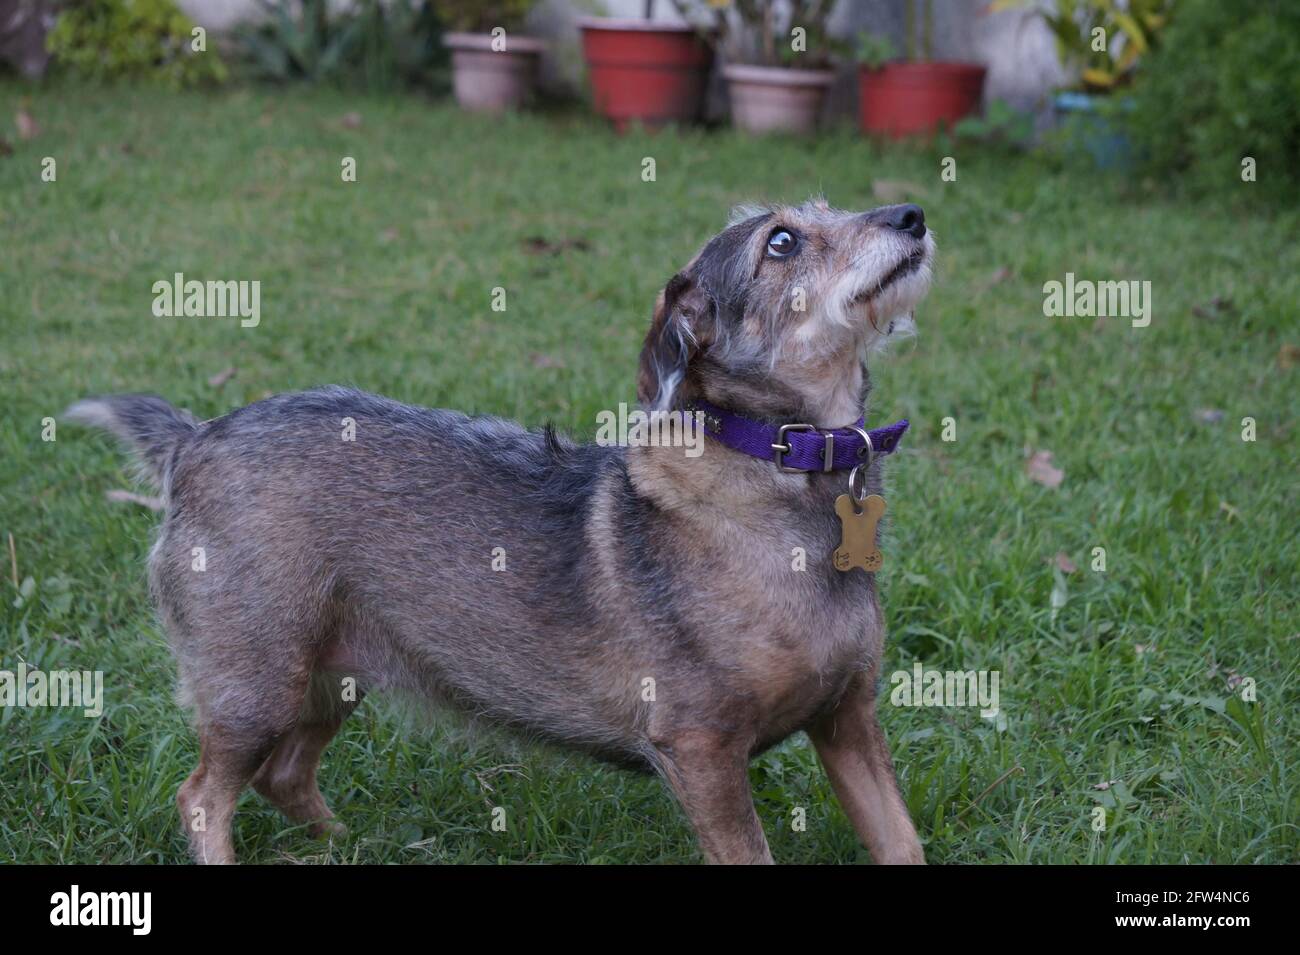 Small cute dog playing in the garden and looking up with expectation. Standing in a green grass area with a few pots in the background. Taken outdoor Stock Photo